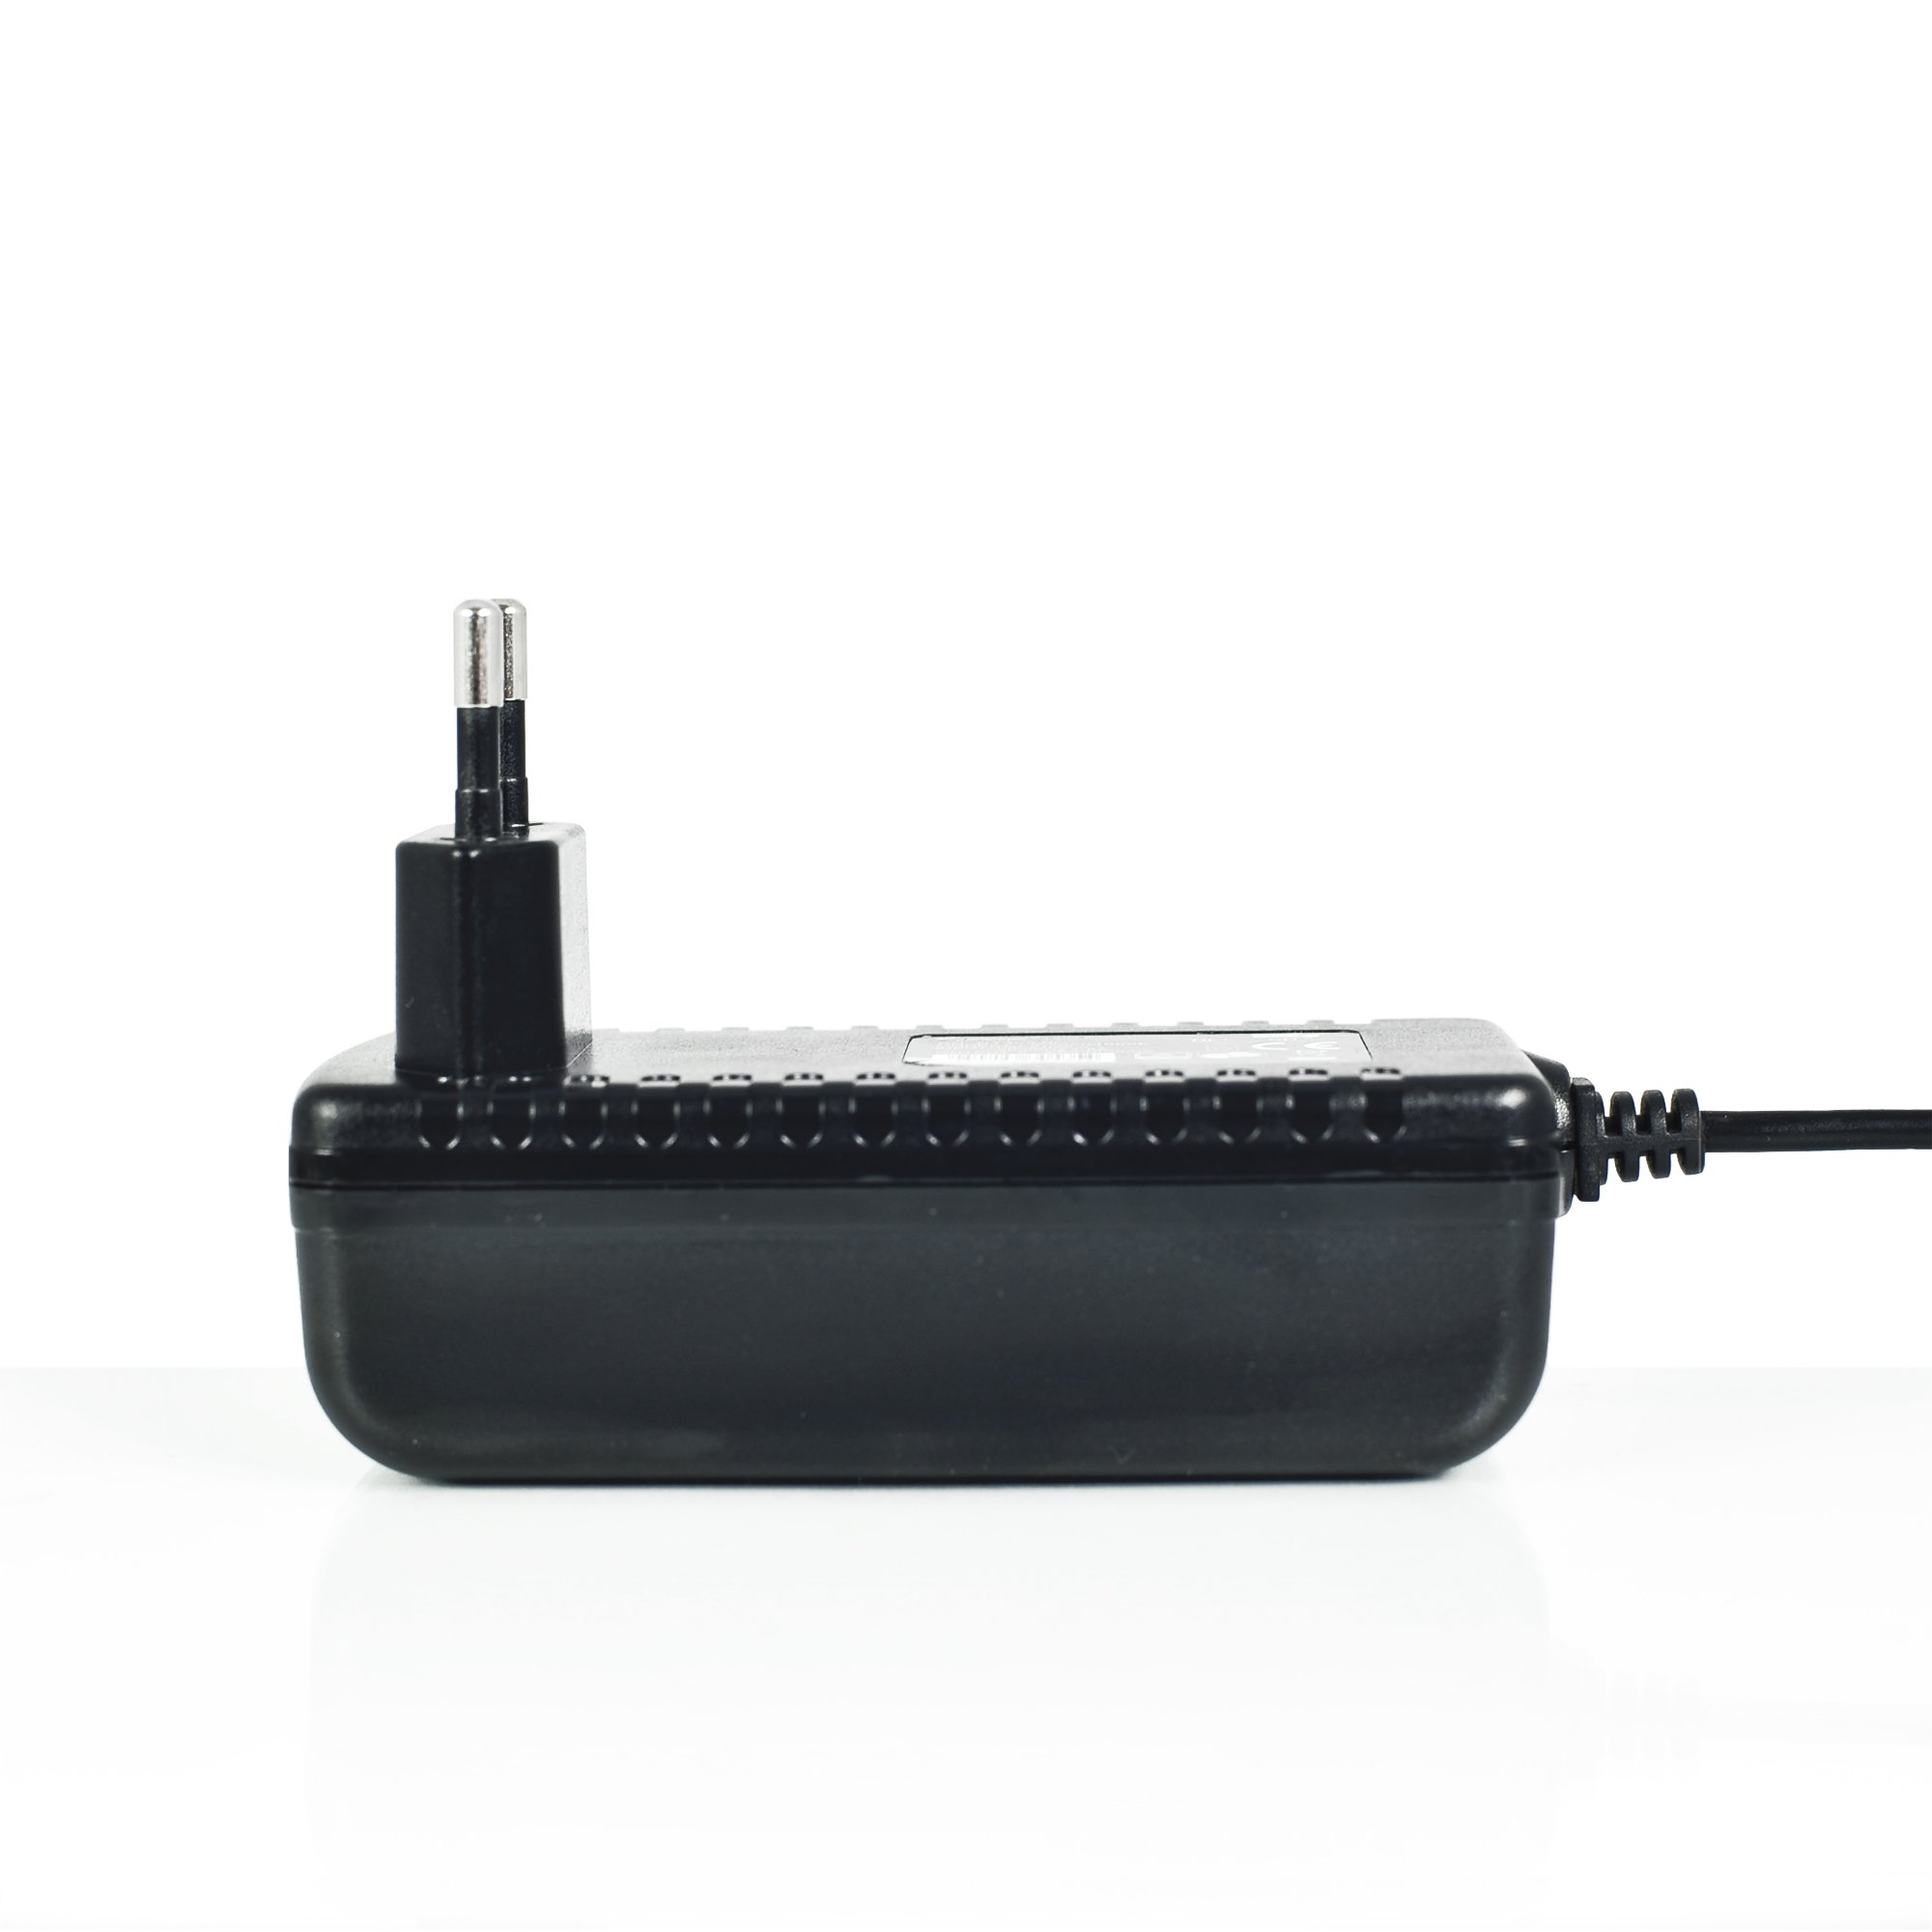 LEICKE Netzteil Mit 5V USB 4A Micro 20W Netzteil,Charger Power-Switch,